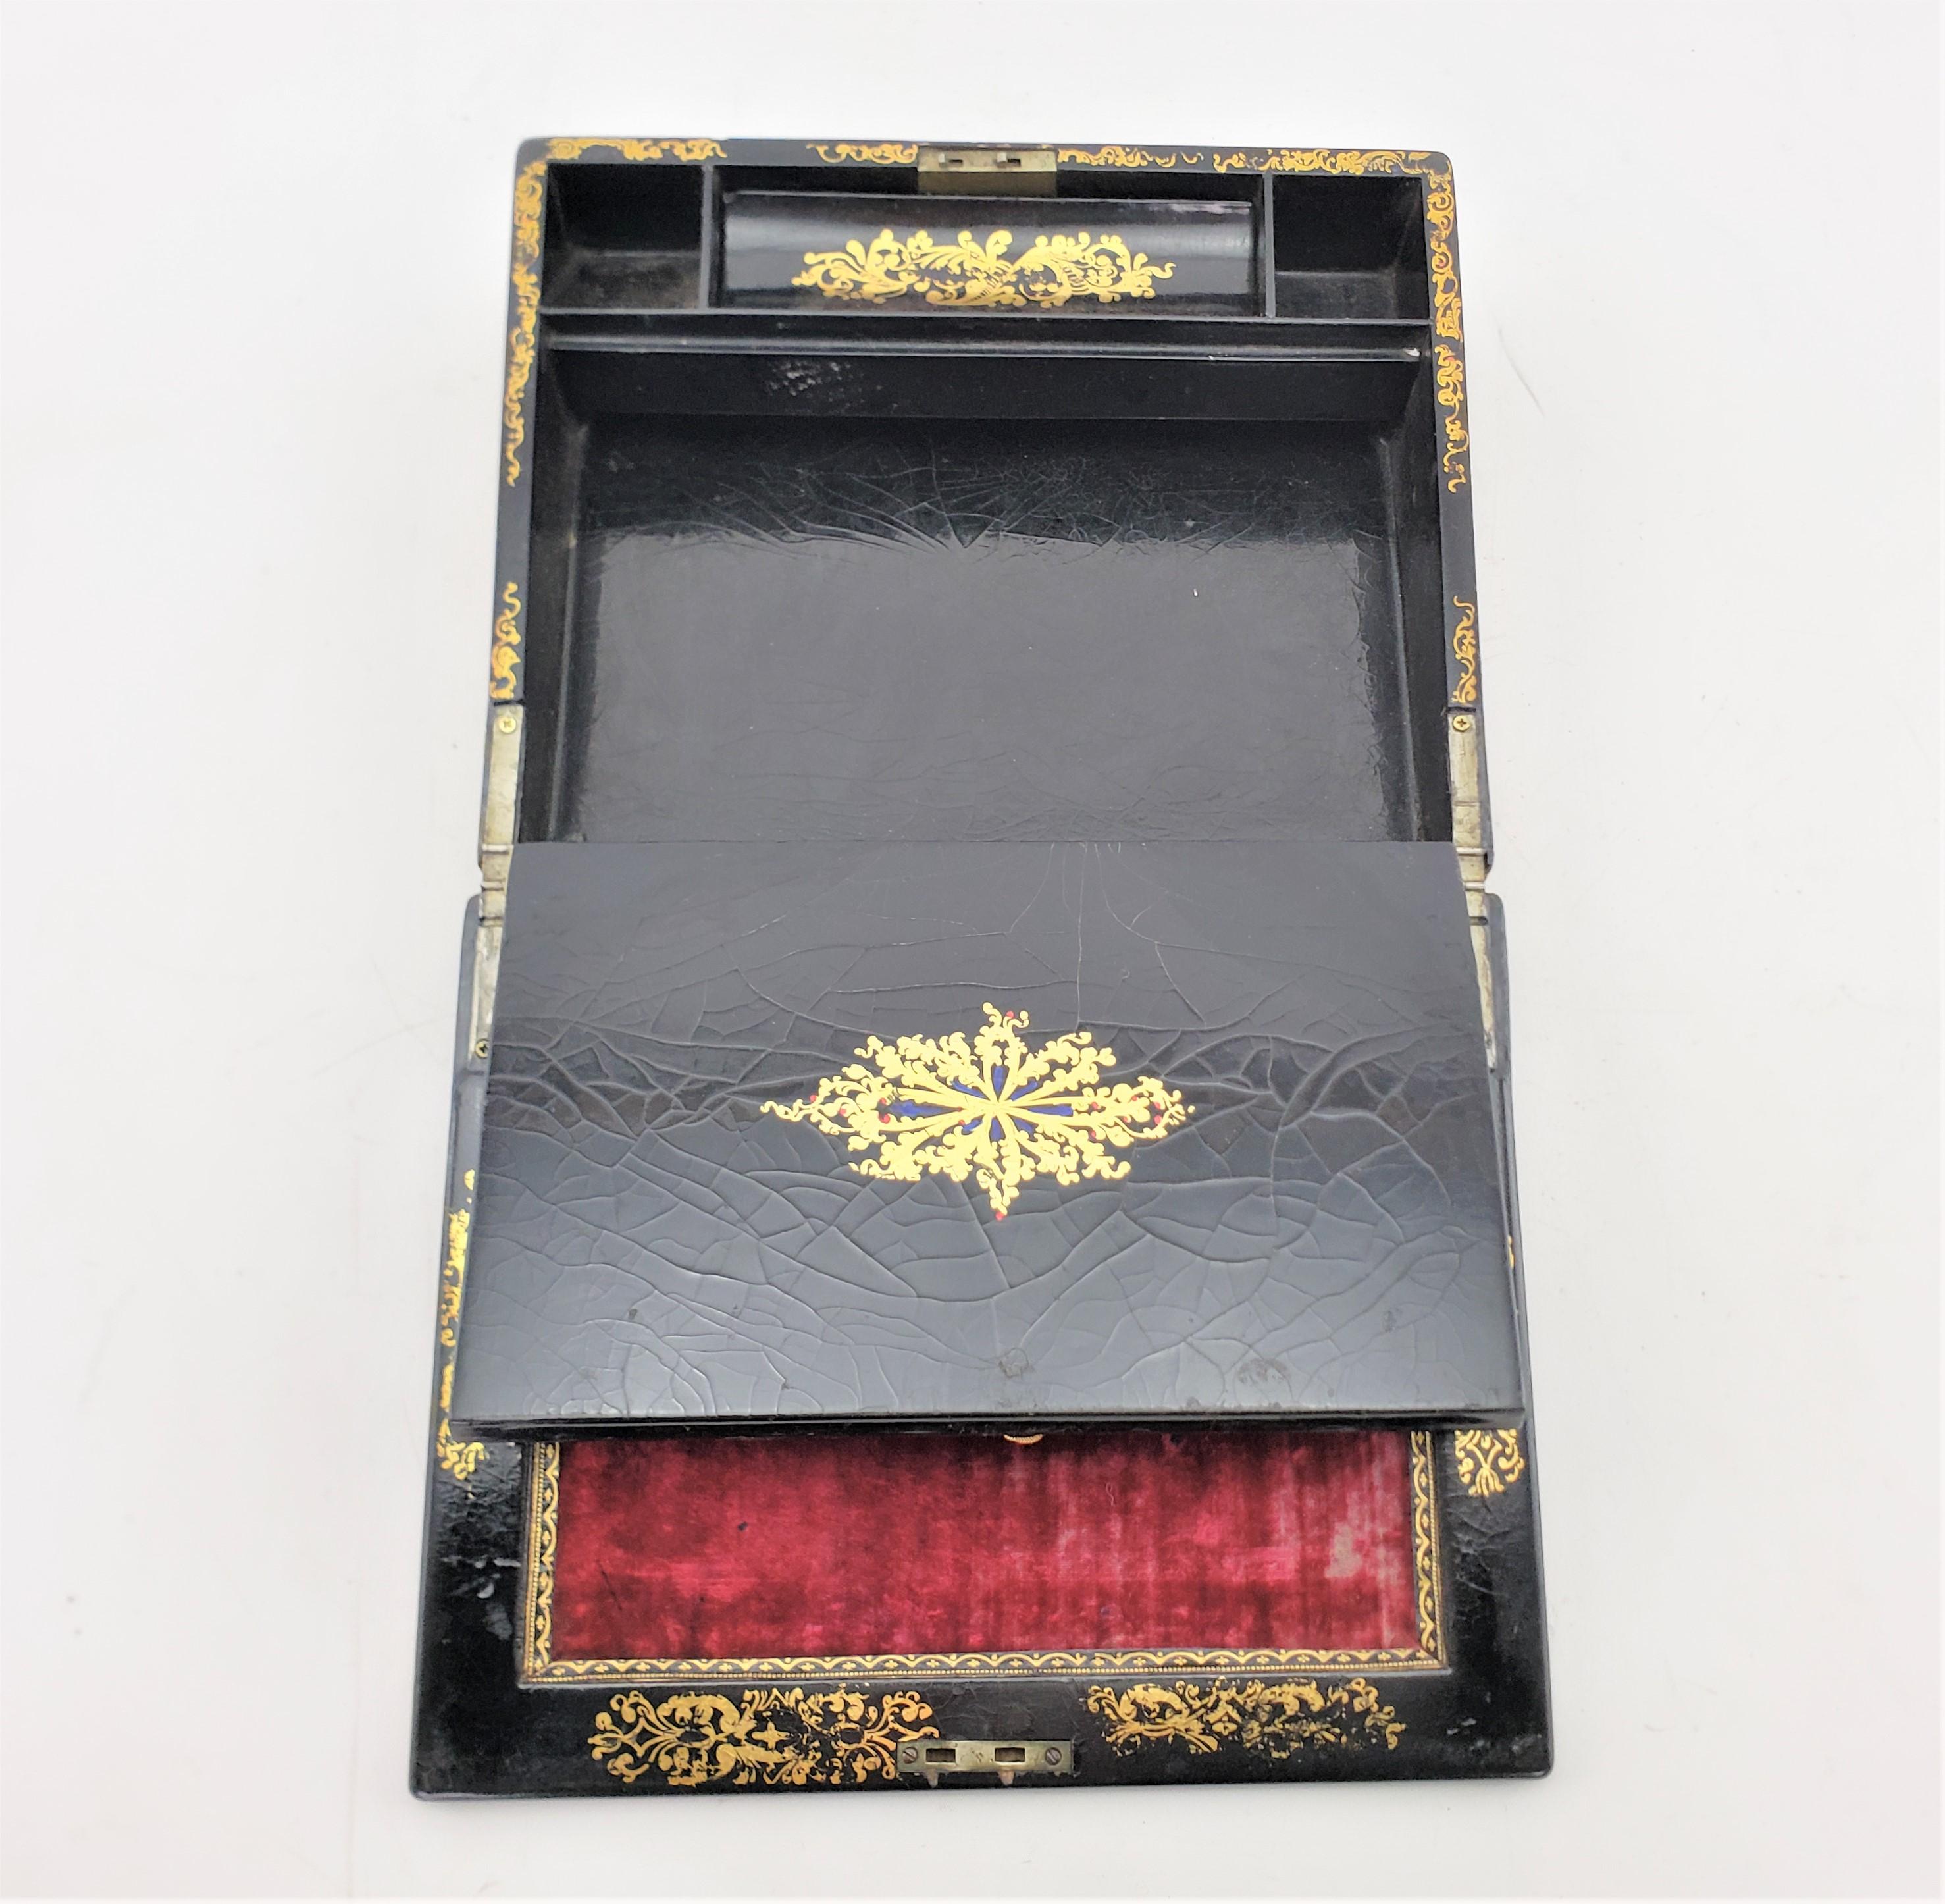 Antique English Paper Mache Ladies Writing Box or Lap Desk with Japanned Finish For Sale 3